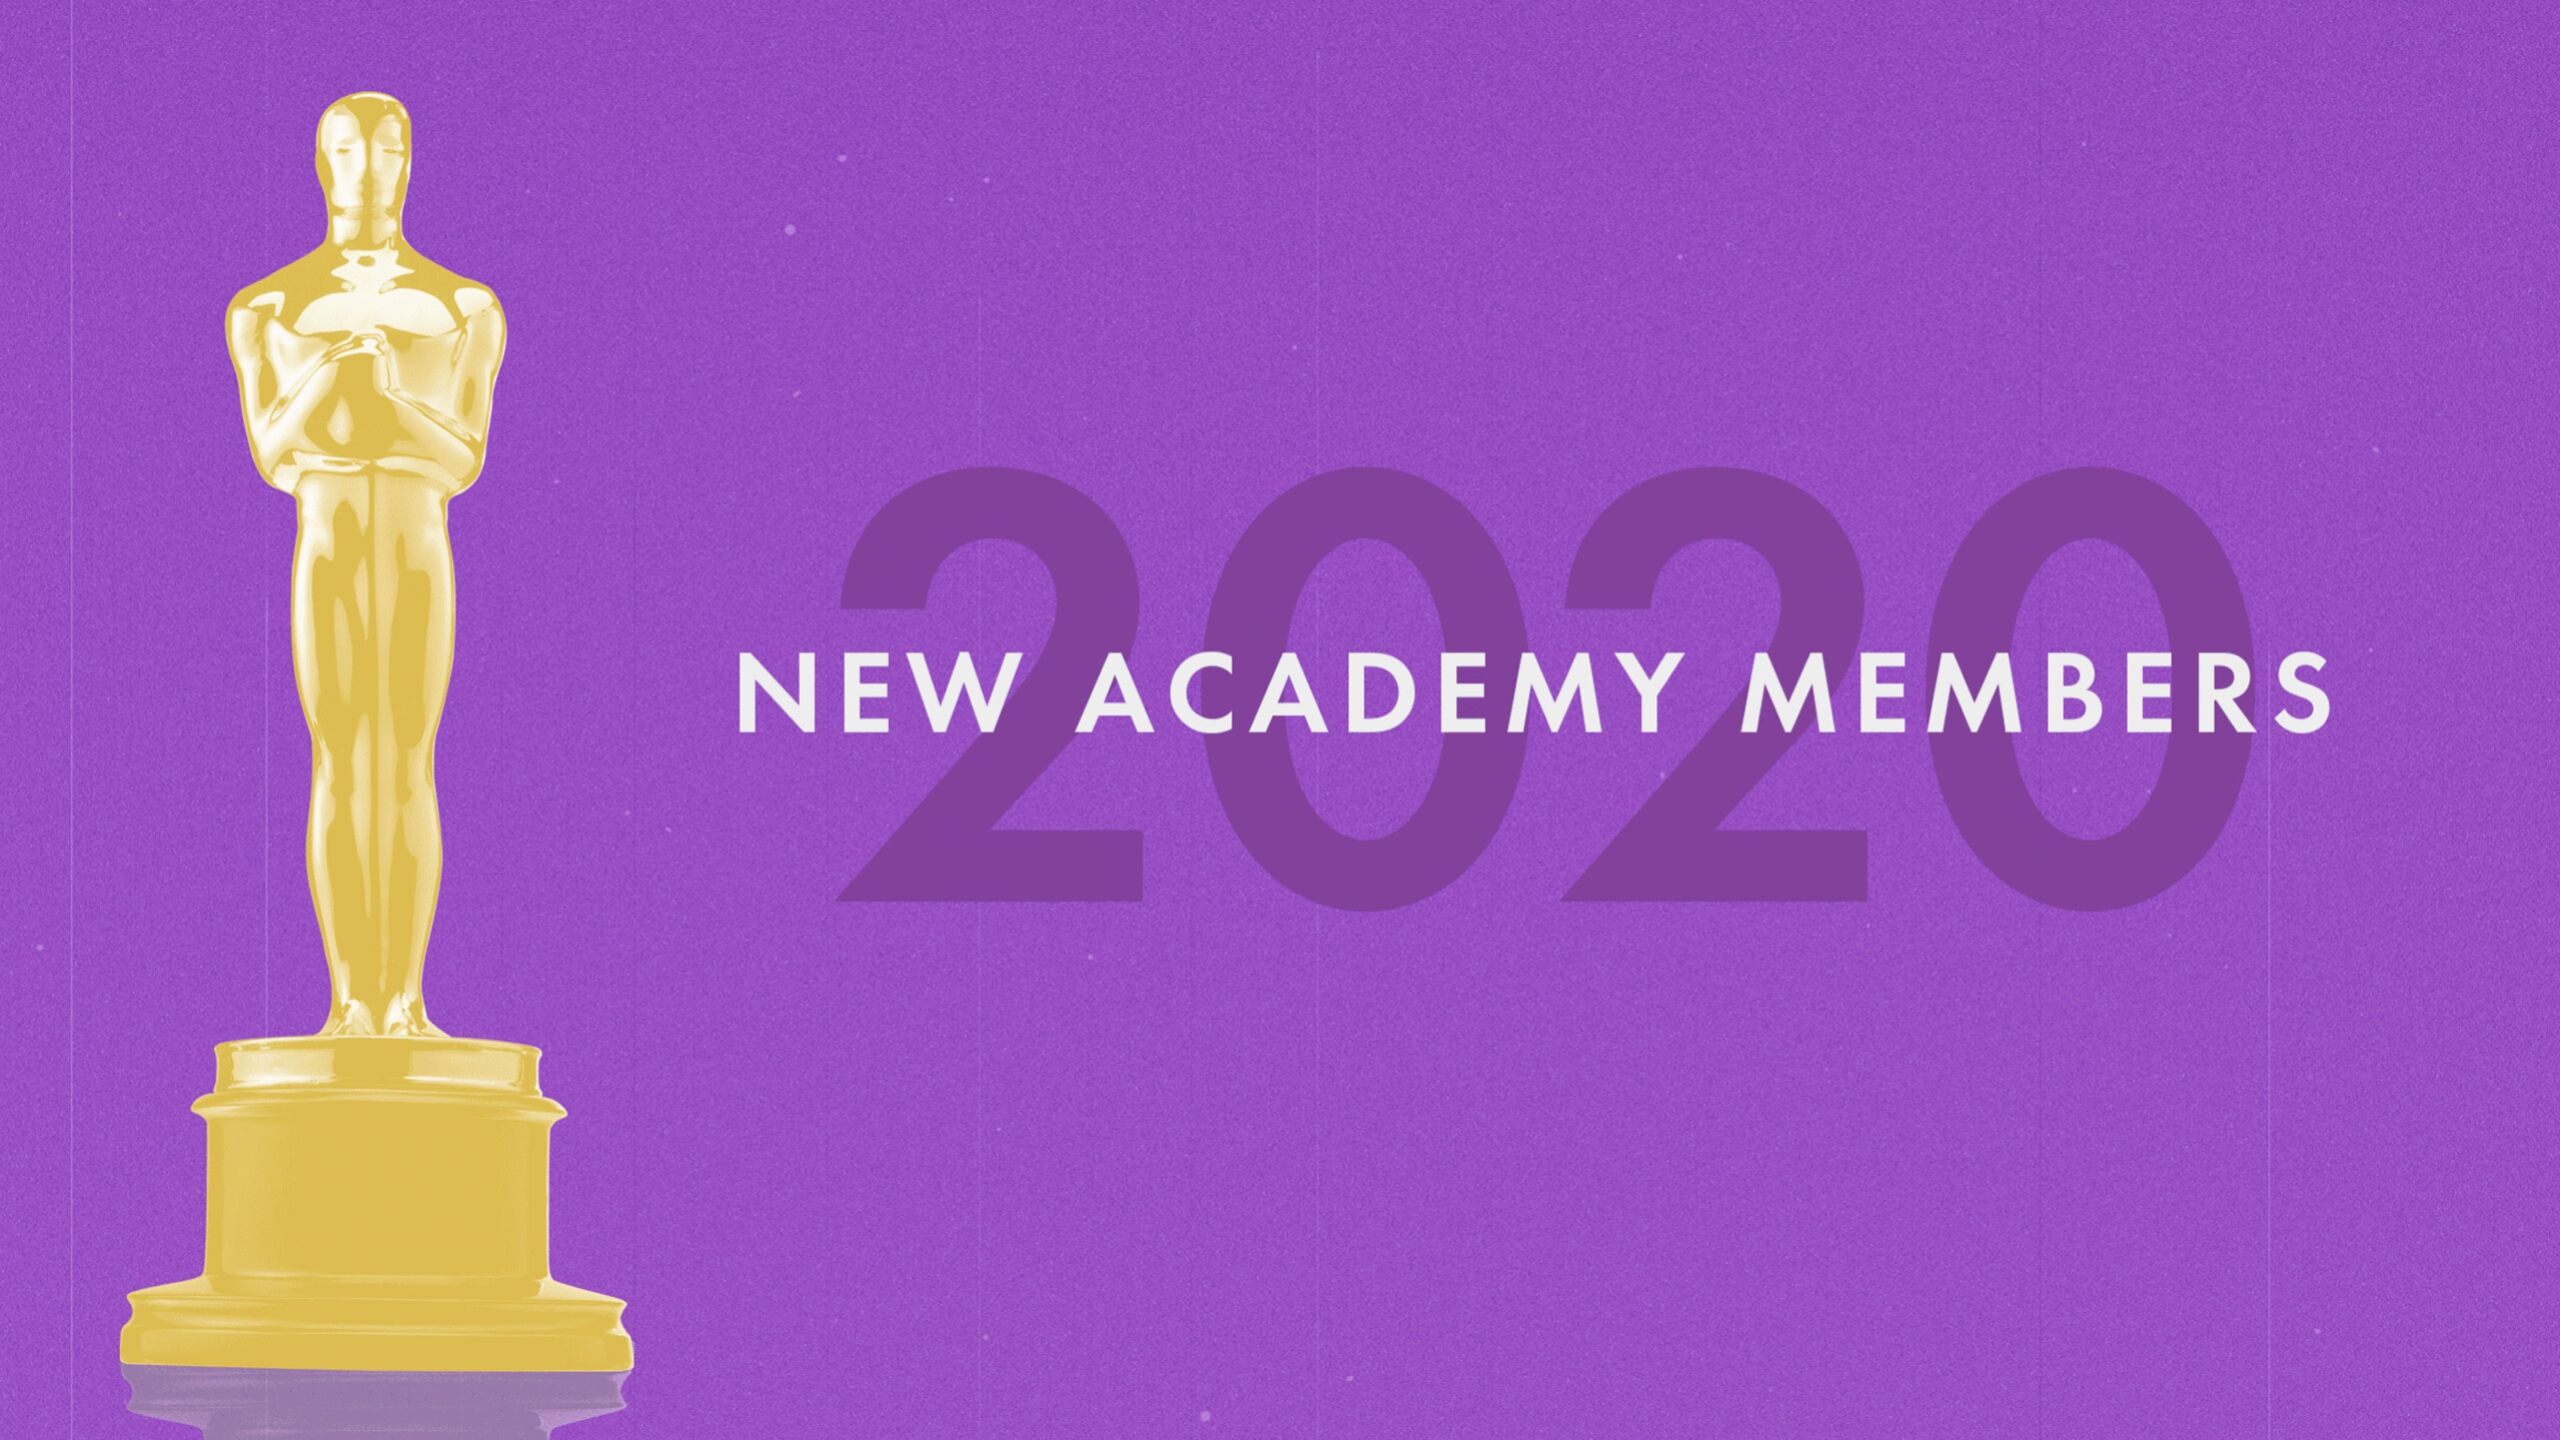 Academy Invites 819 From 68 Countries To Join Its Ranks